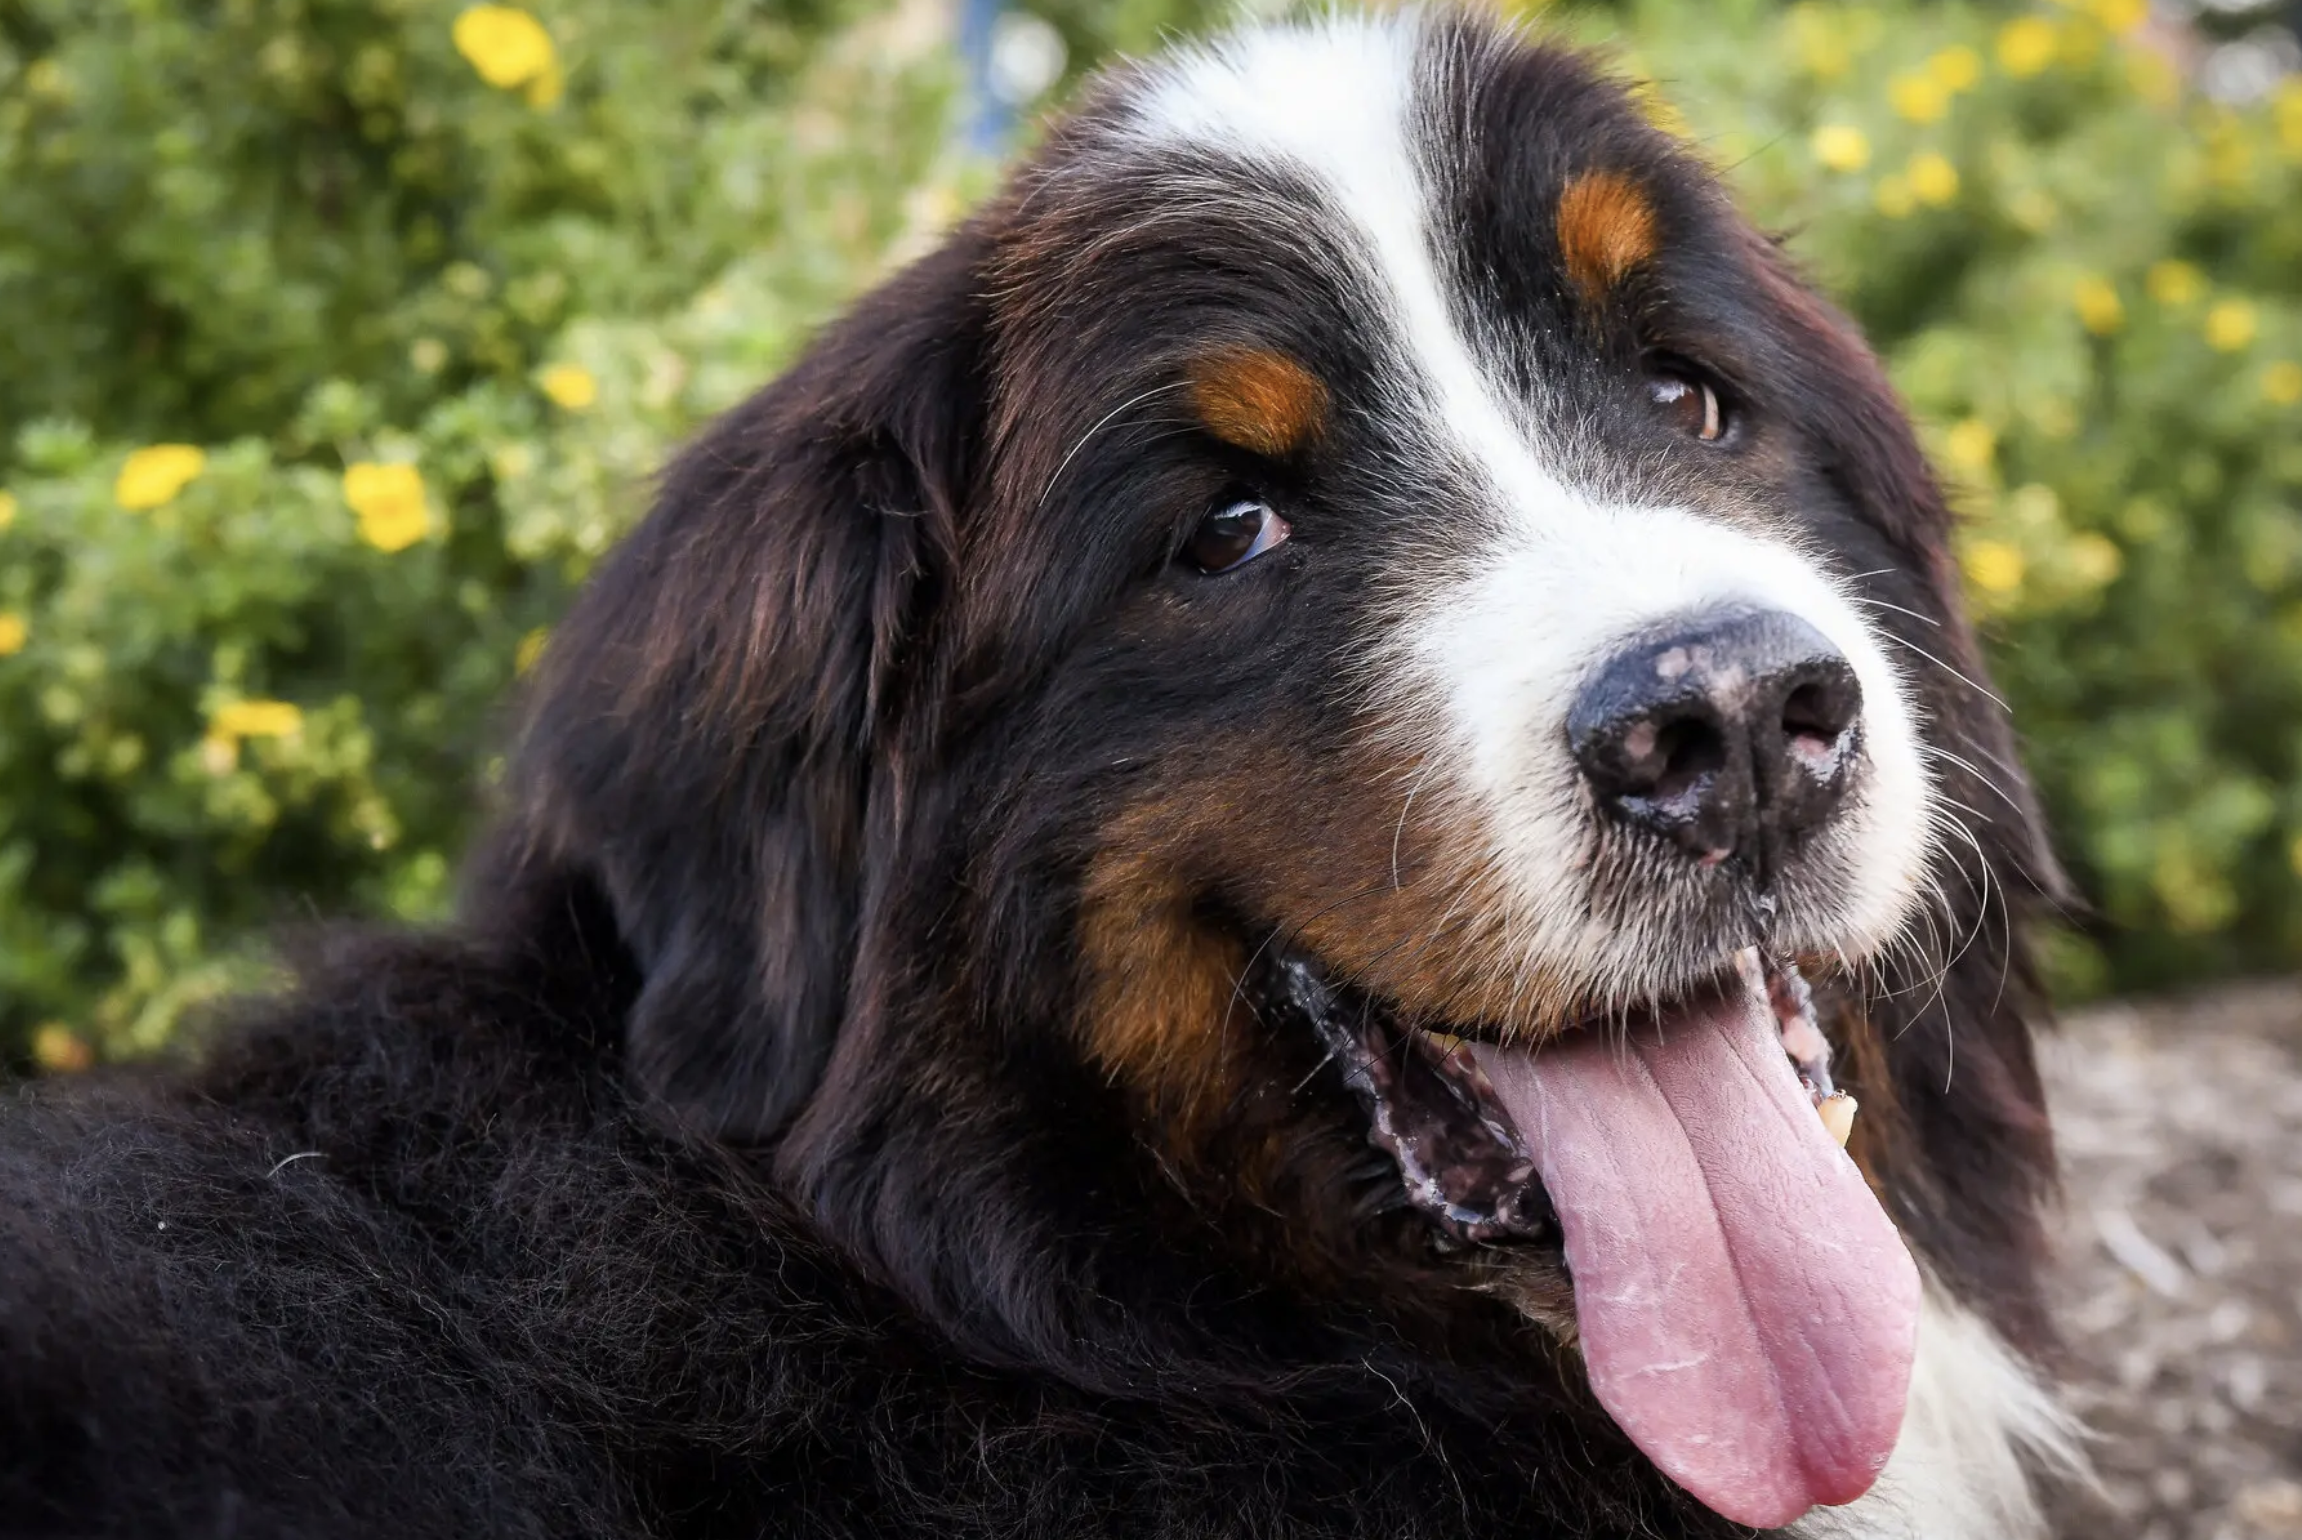 Dante, an 11-year-old Bernese mountain dog who has been diagnosed with canine cognitive dysfunction